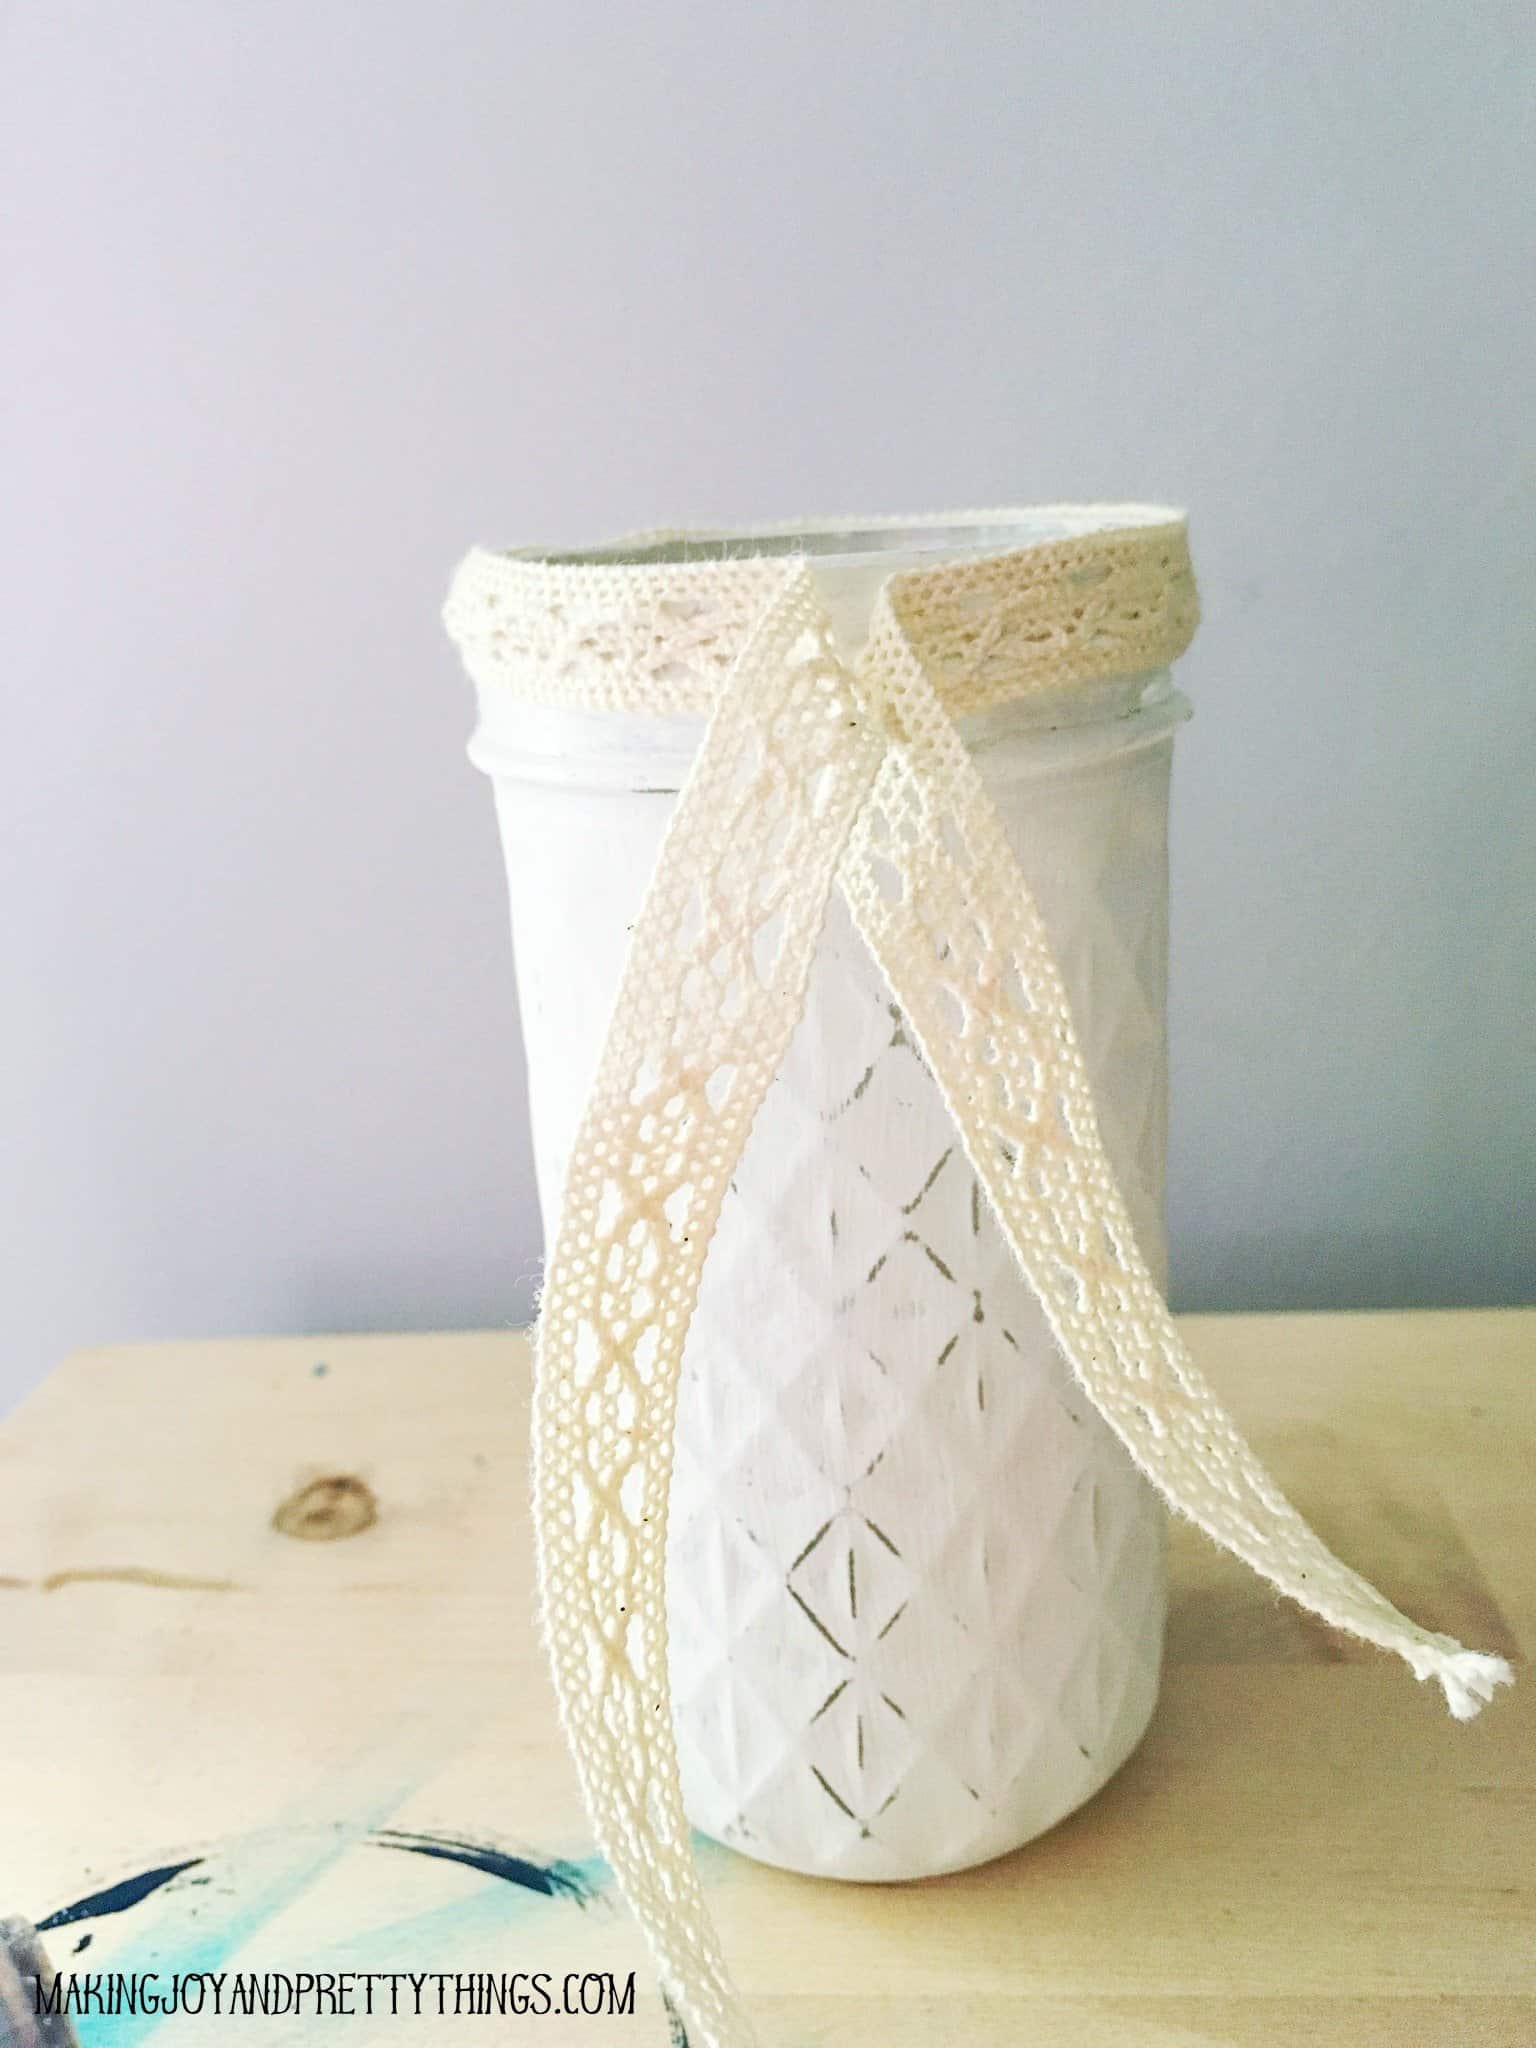 Using ribbon to ad a nice touch to a jerry jar gives off such a beautiful accent to the distressed technique